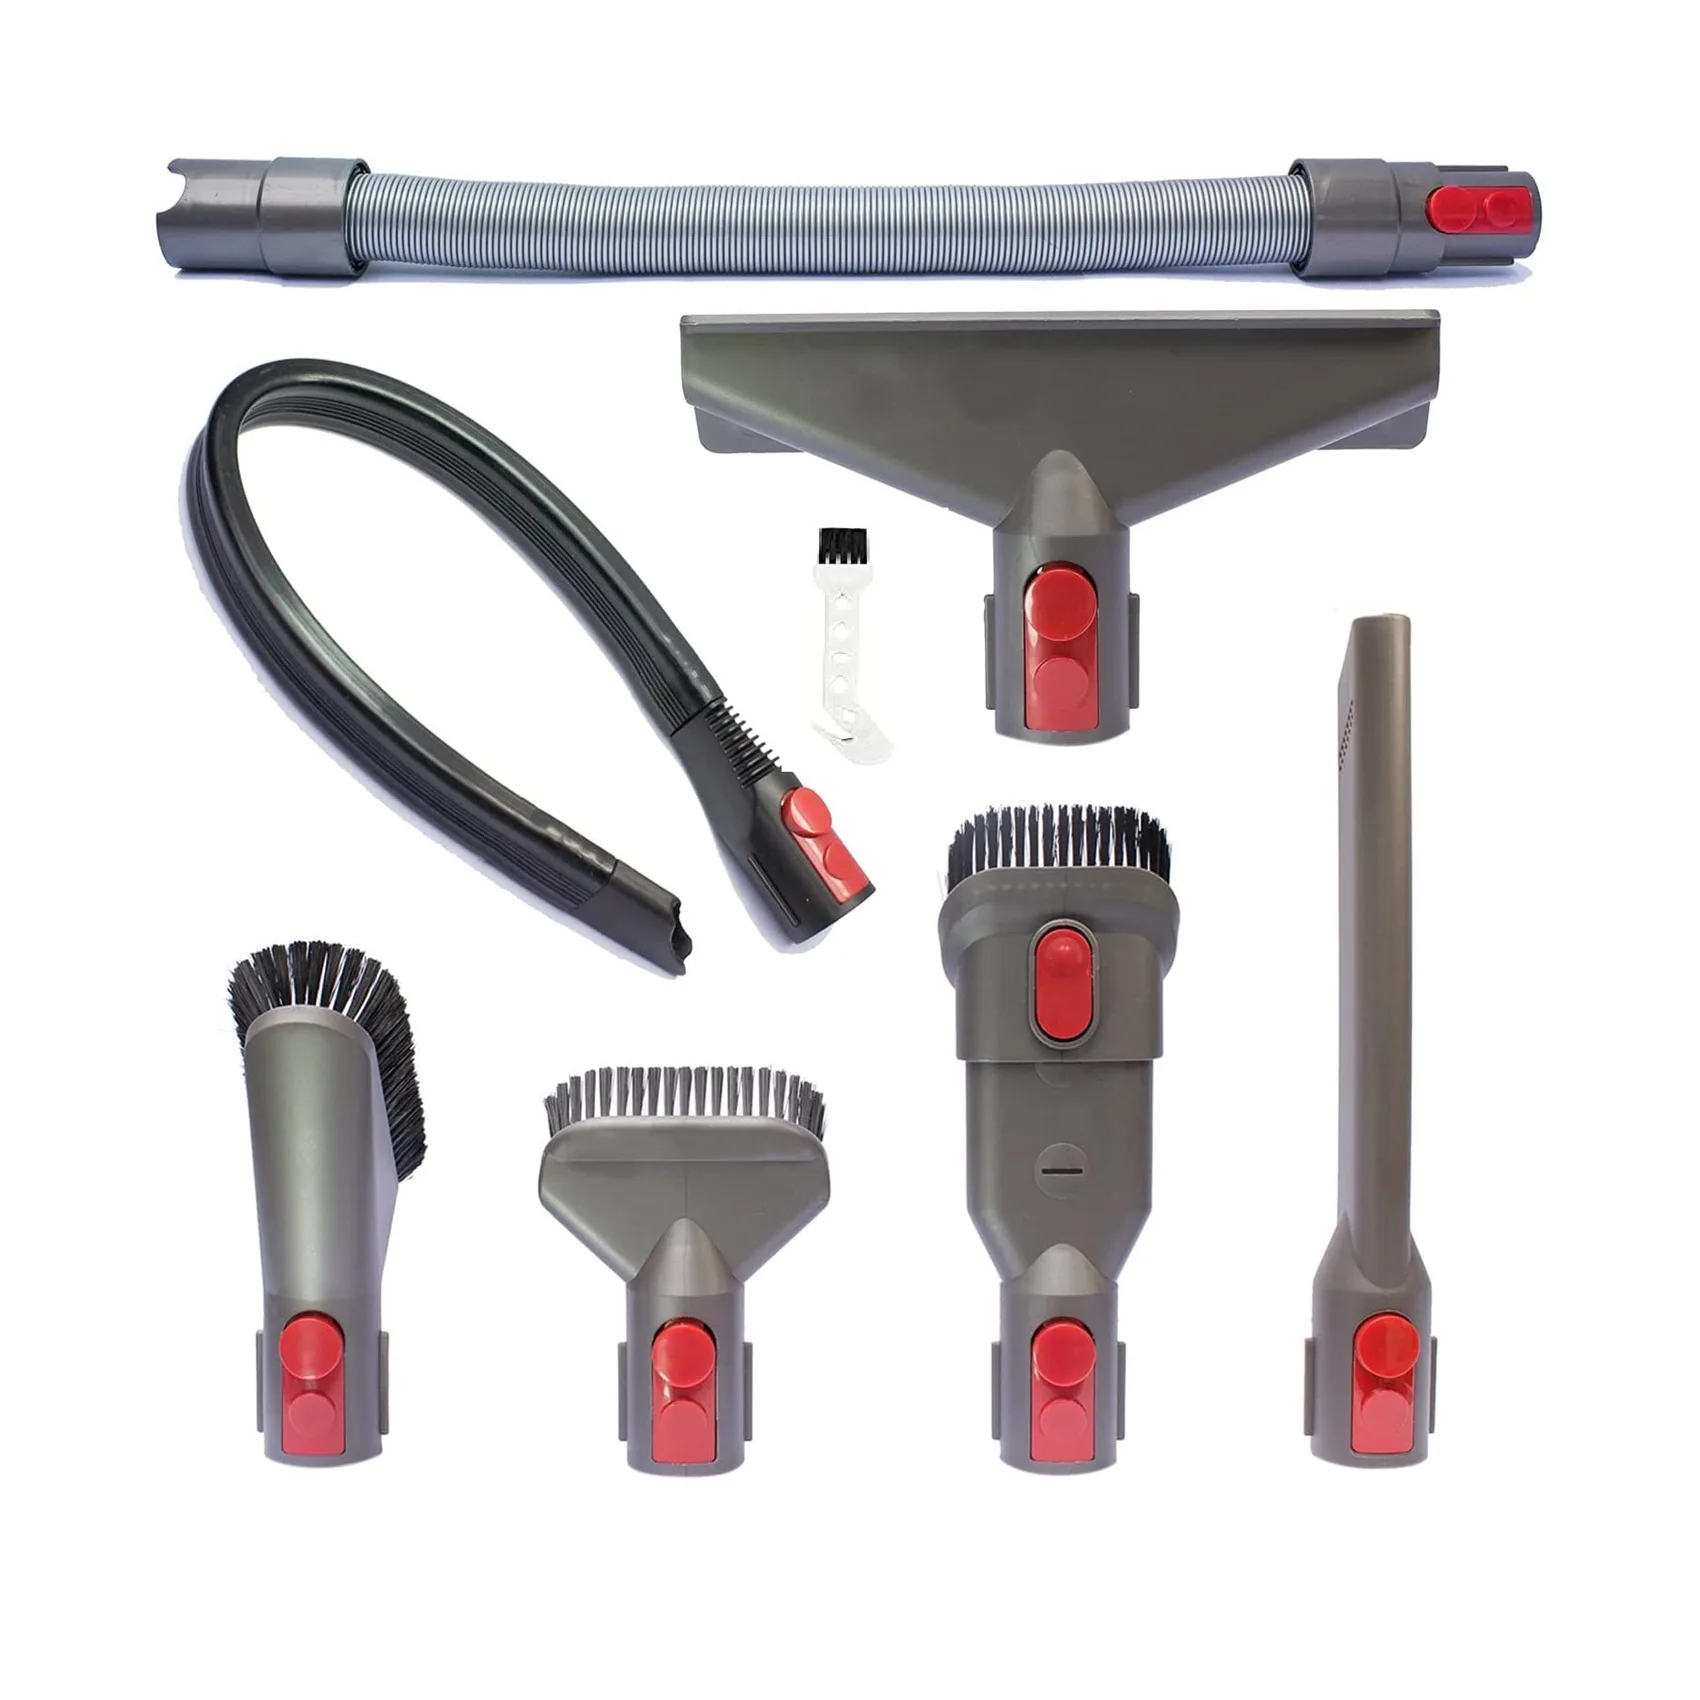 

Dryer Cleaning Tool & Vacuum Attachments for Dyson V11 V10 V8 V7 Plus Flexible Extension Hose Vacuum Cleaner Accessories